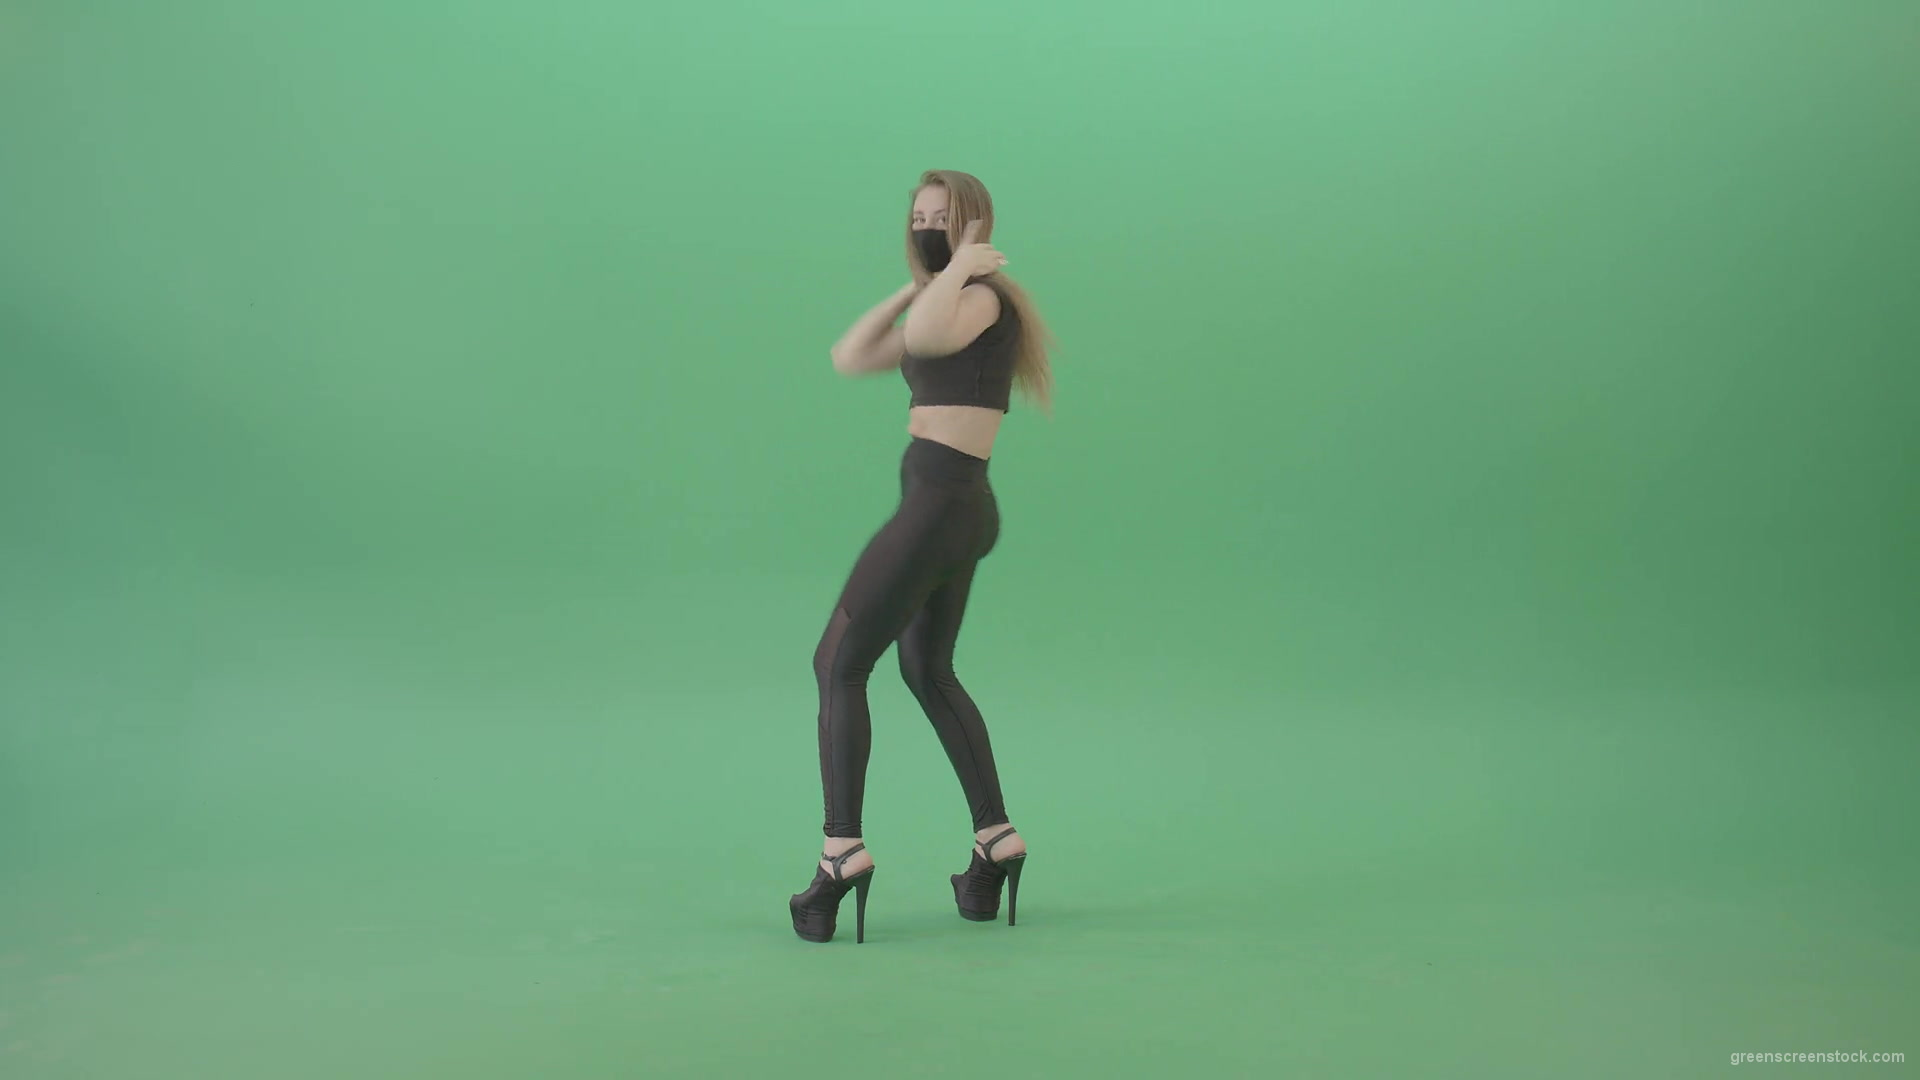 Exotic-sexy-dance-by-girl-in-black-latex-dress-isolated-on-green-screen-4K-Video-Footage-1920_002 Green Screen Stock